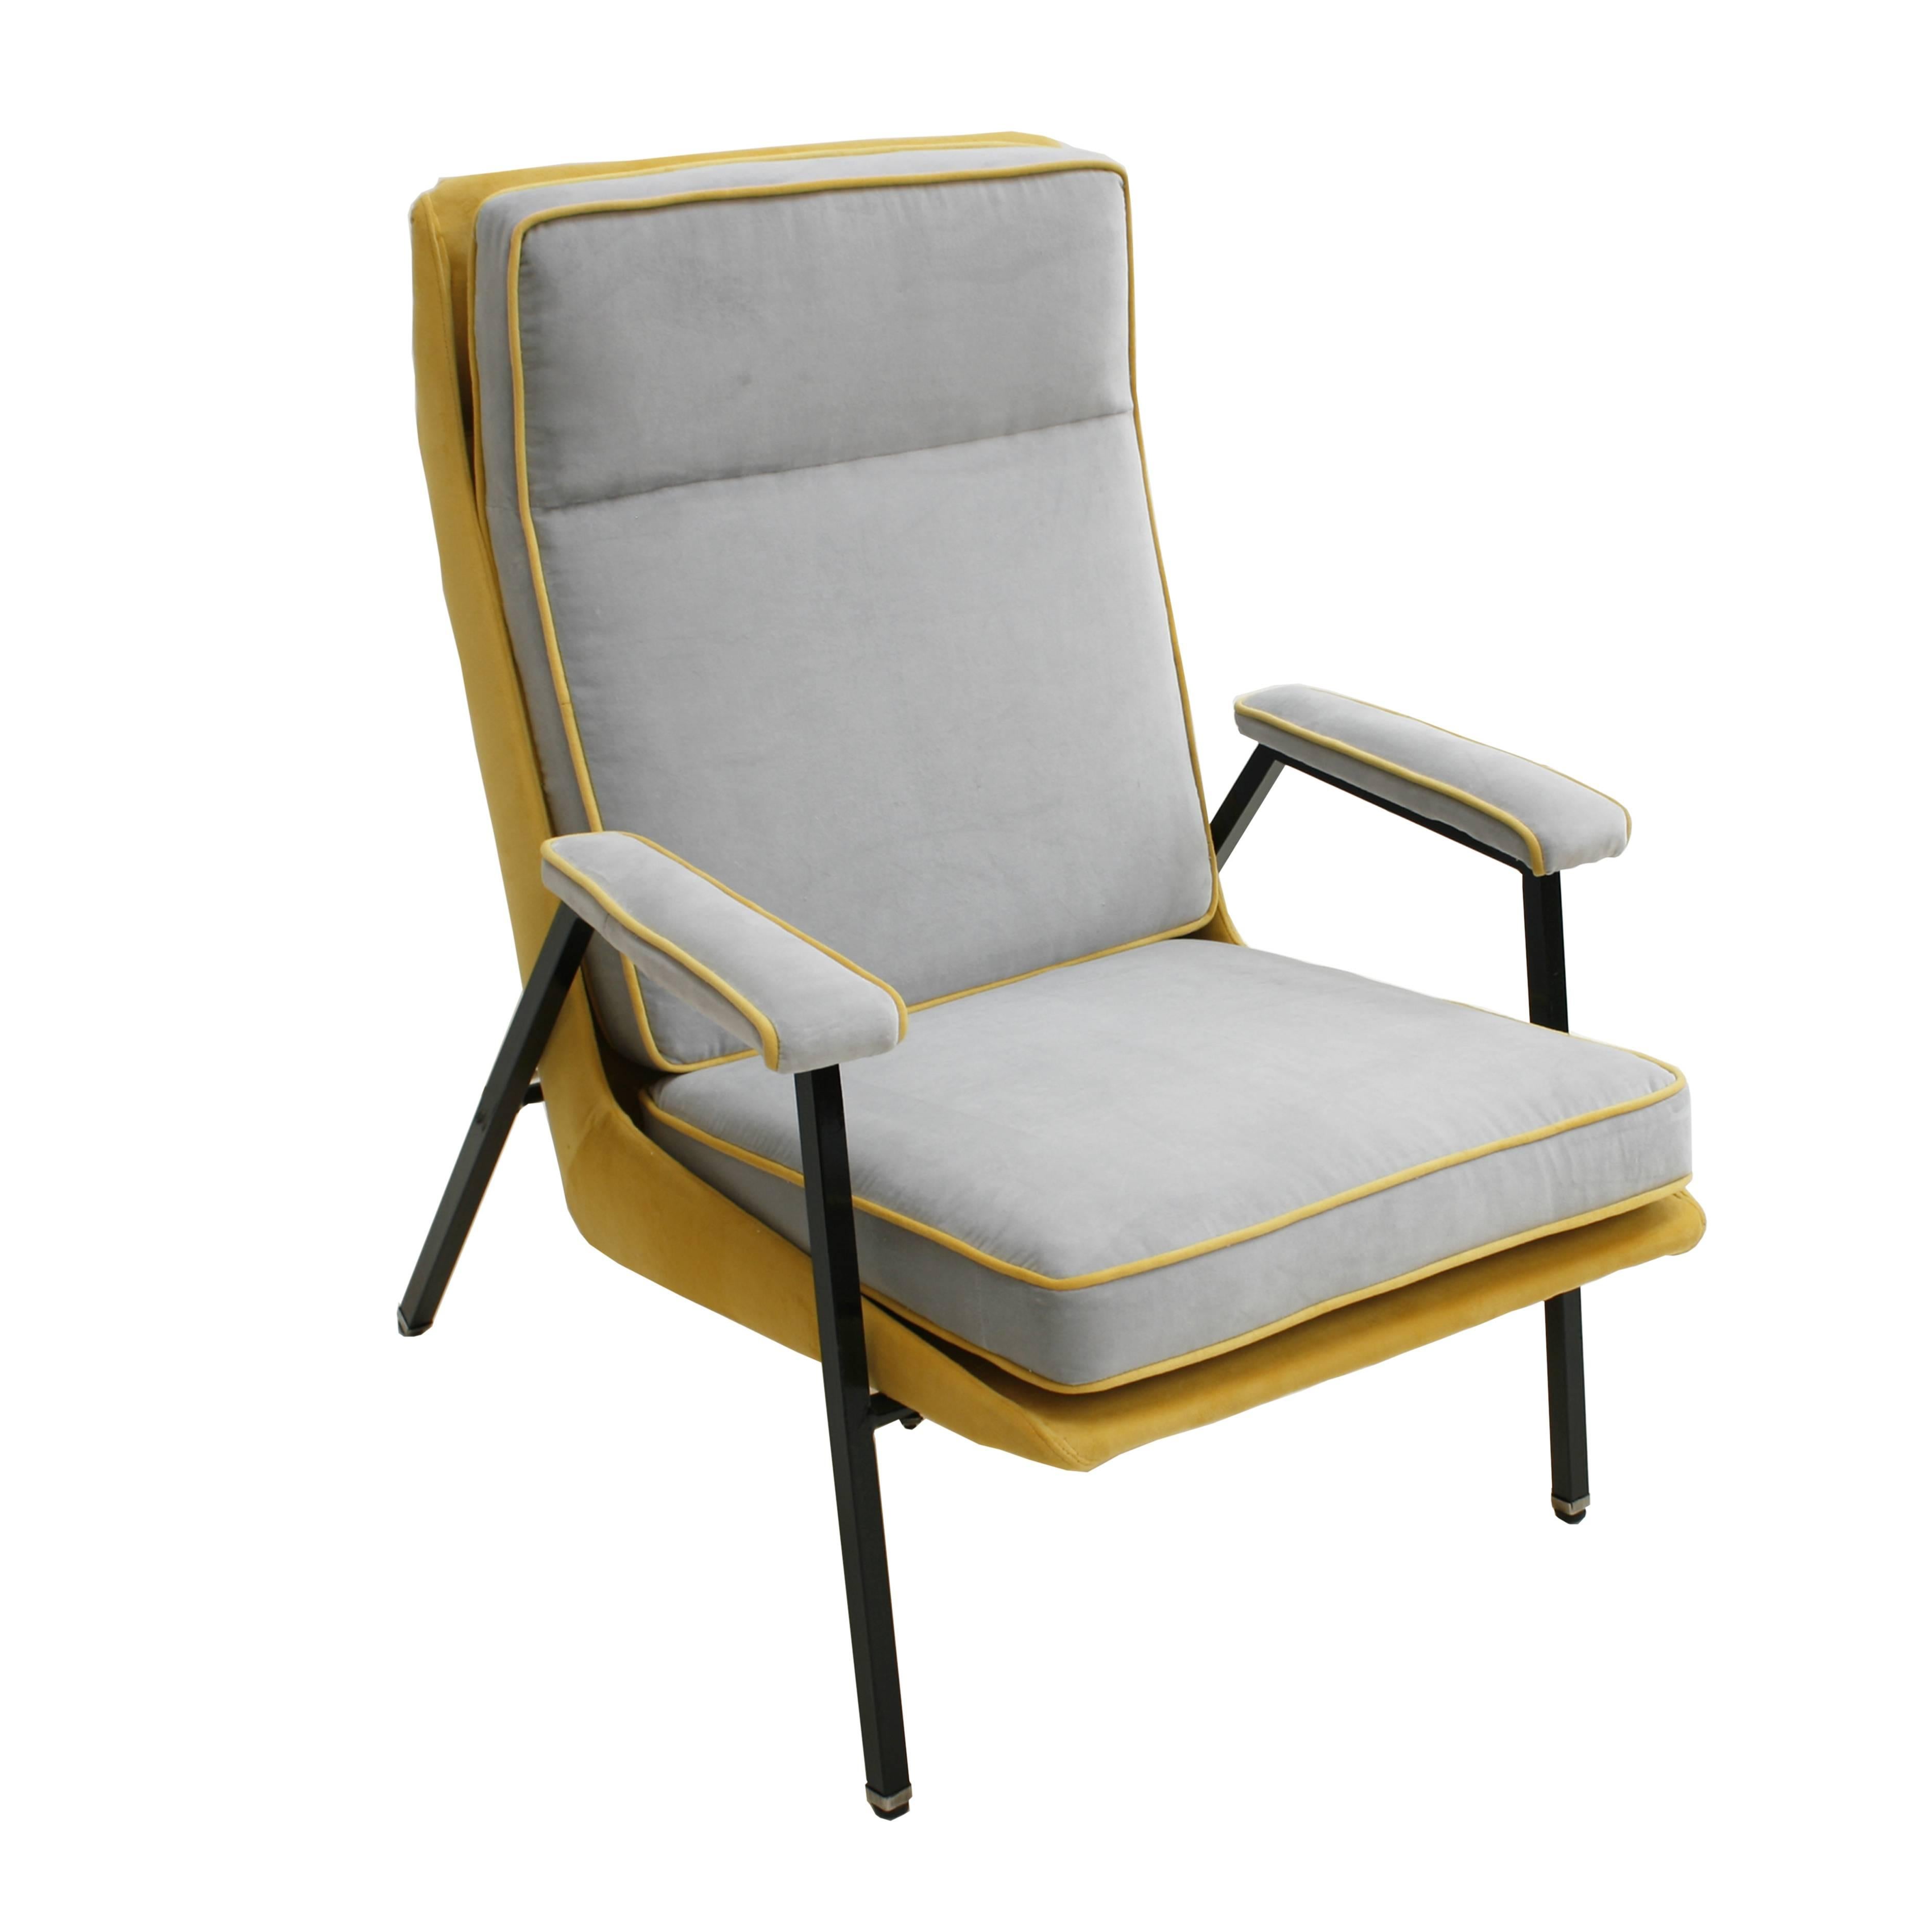 Armchair designed by Pierre Guariche. Structure made of metal with legs lacquered in black. Yellow and gray cotton velvet upholstery, France, 1950.

 